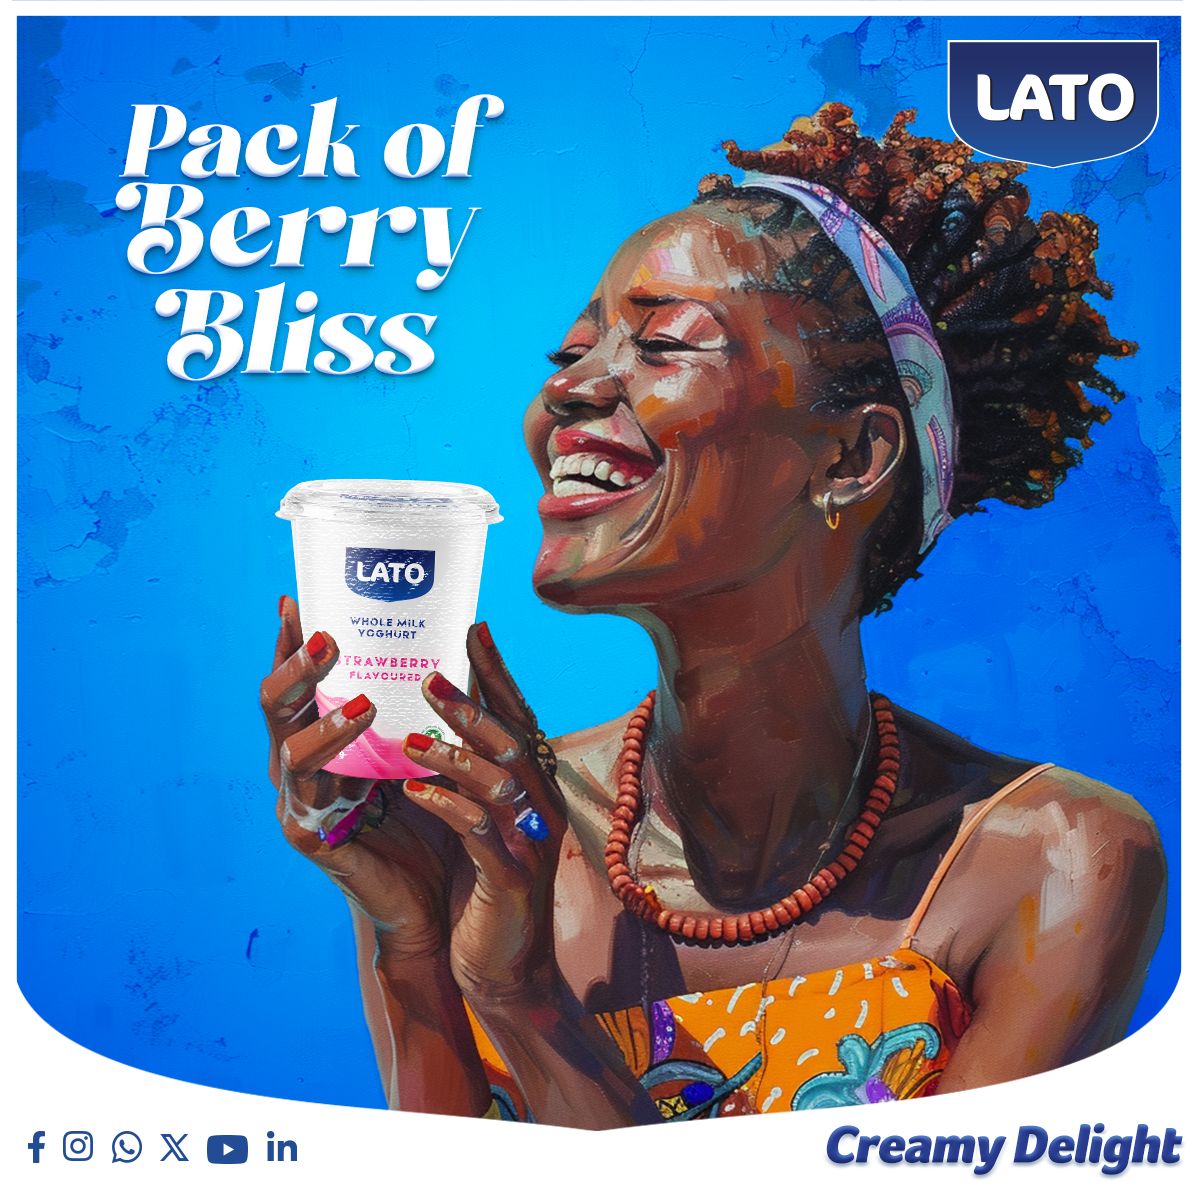 A delicious way to start your day is with a pack of Lato Strawberry Yoghurt! It is the perfect blend of creamy and fruity! #PackofBerryBliss #StrawberryYogurt #Lato #ItsNutrilicious